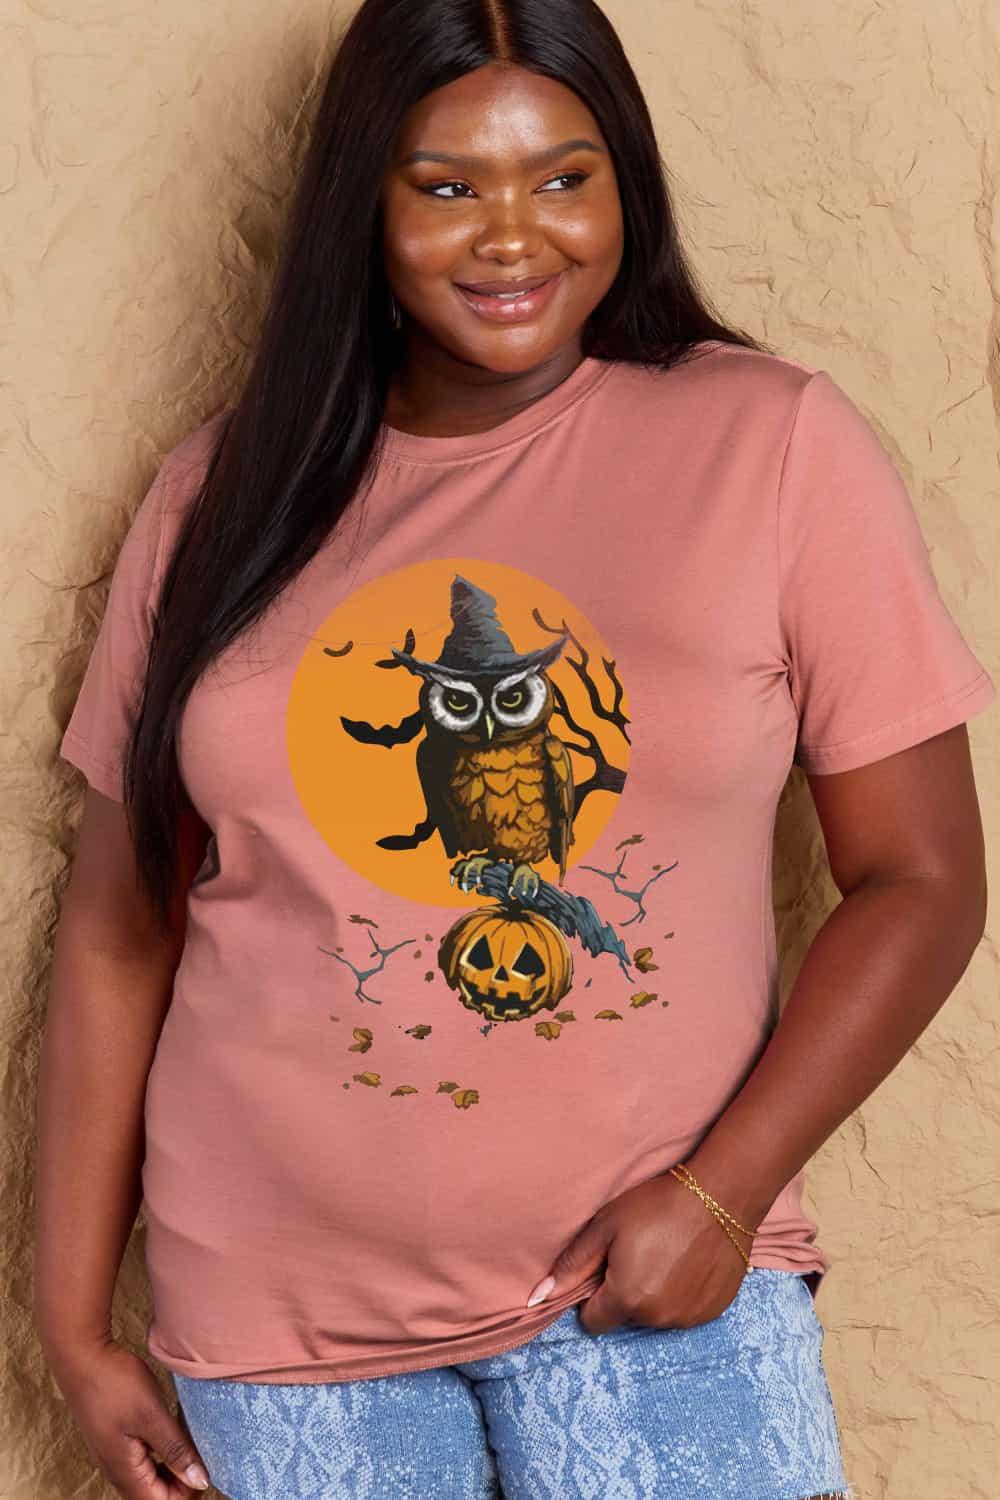 Simply Love Full Size Holloween Theme Graphic Cotton Tee - Crazy Like a Daisy Boutique